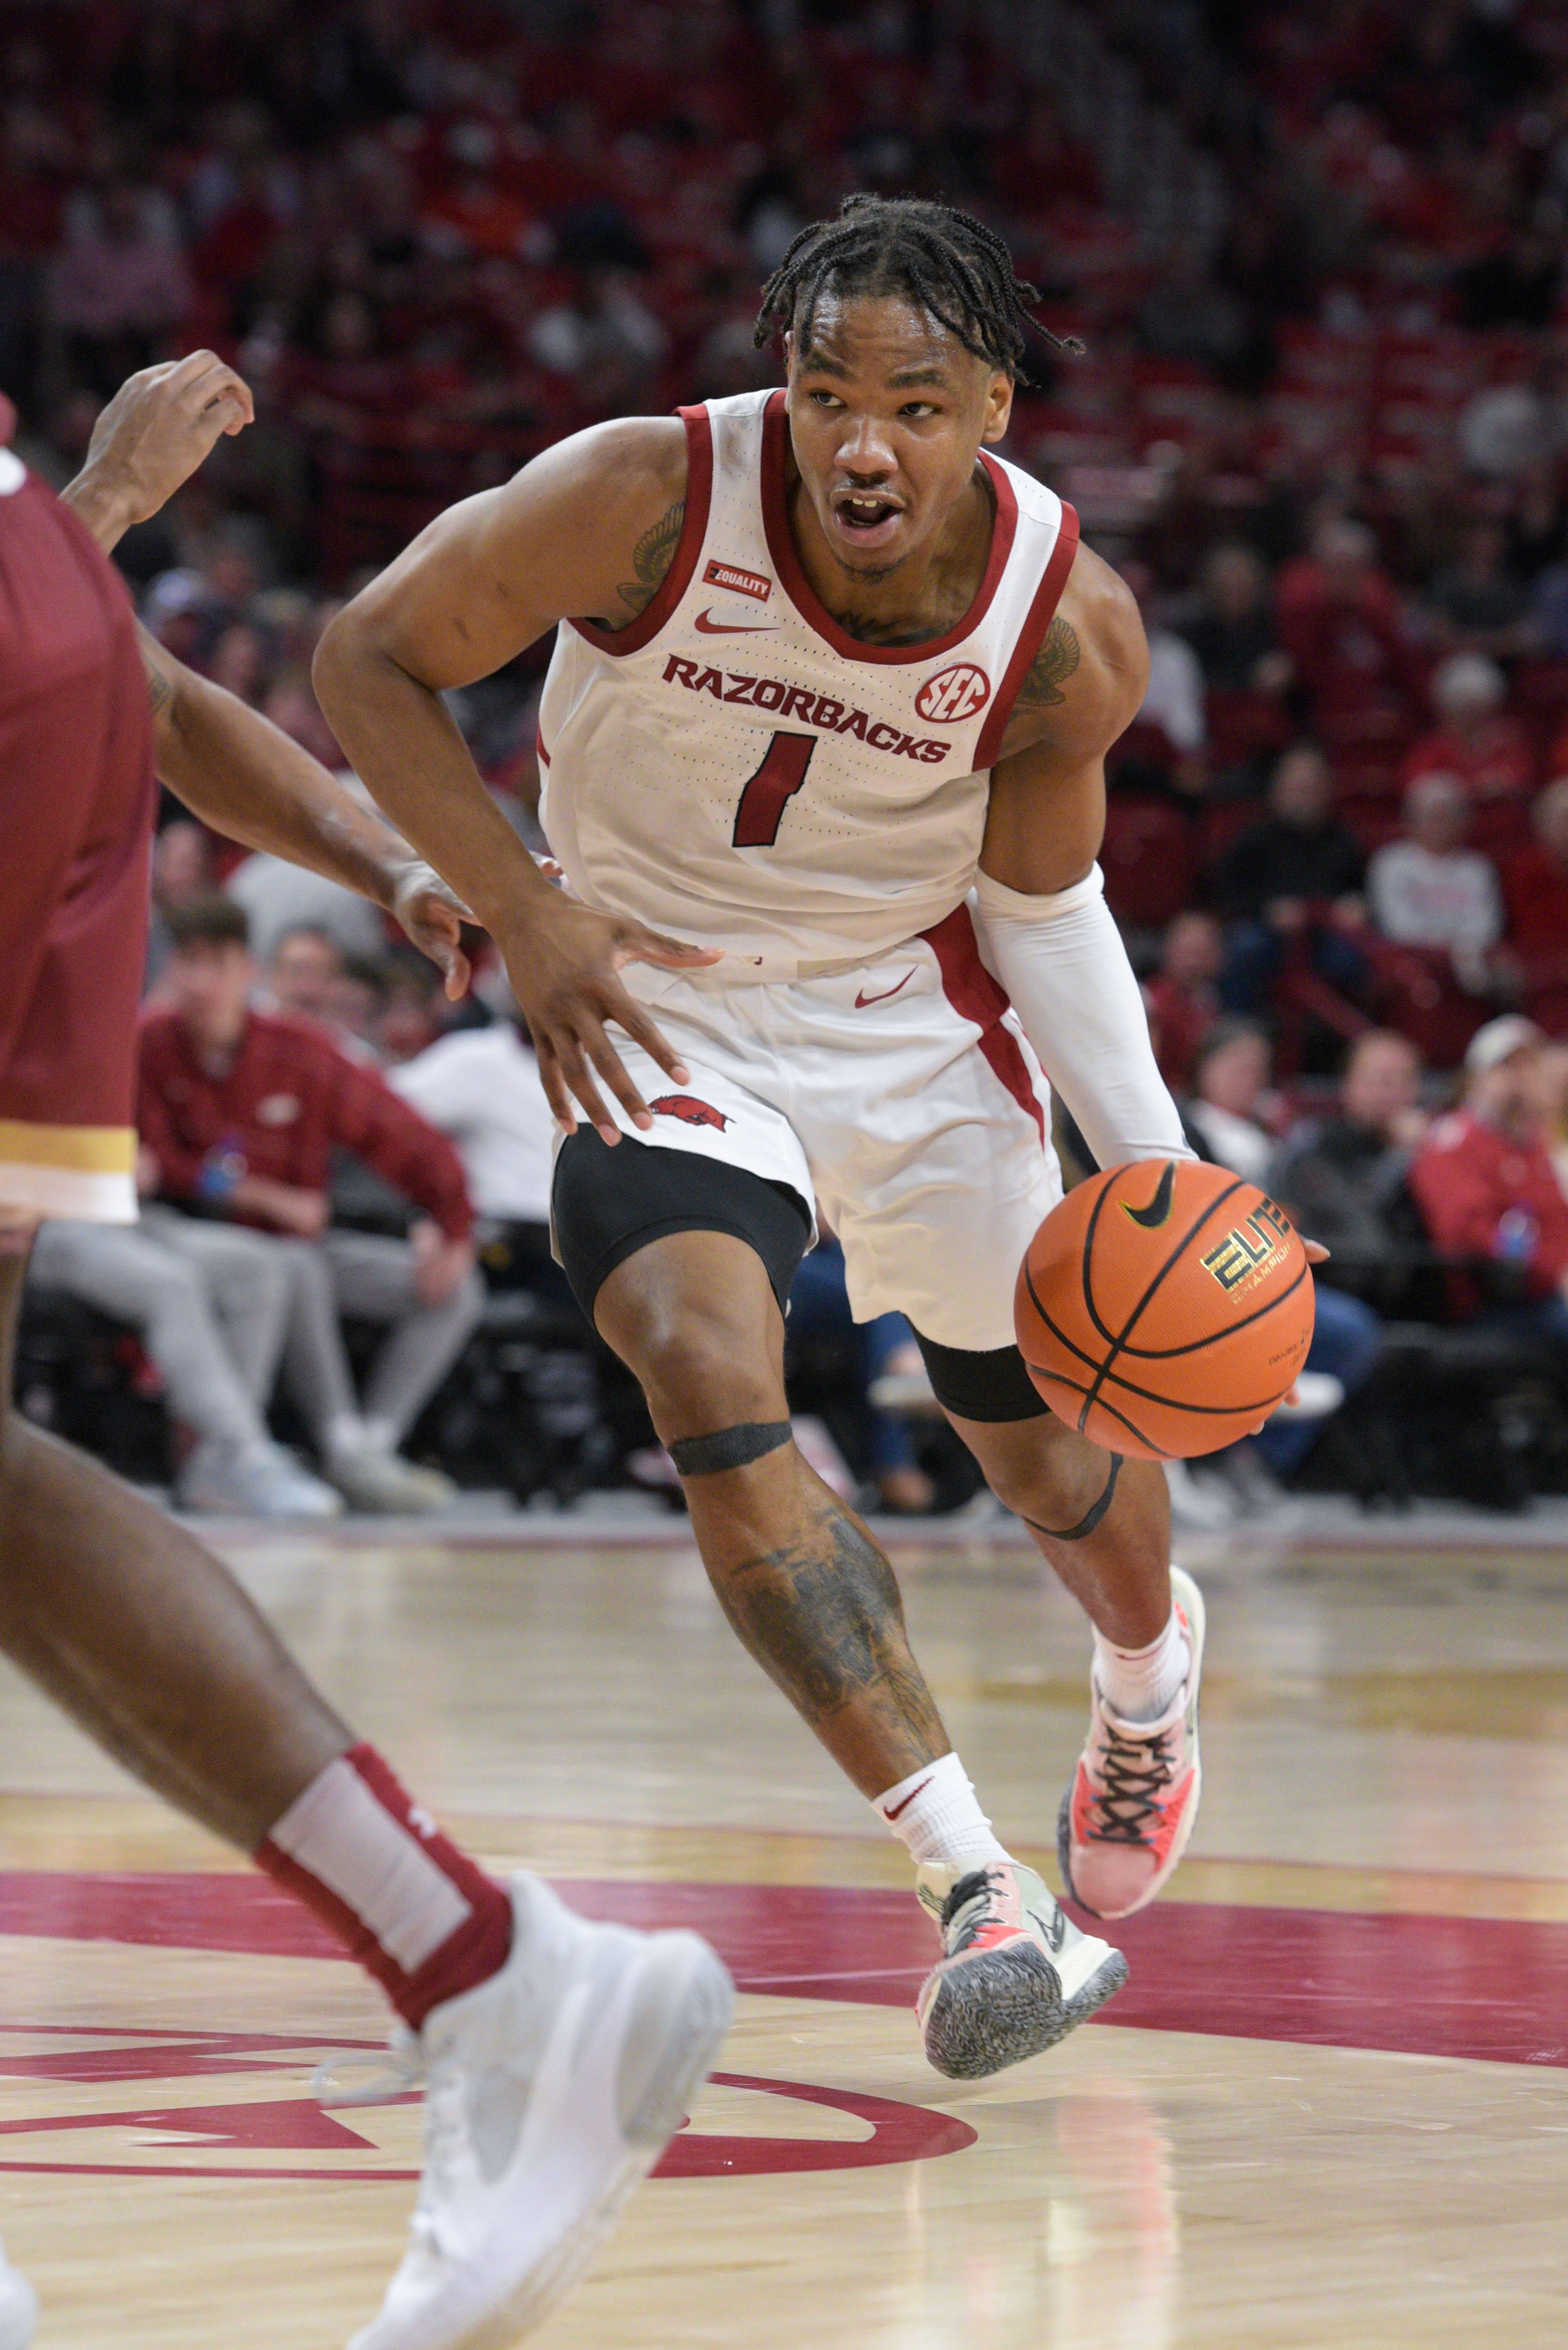 Hogs look to rebound, Notae questionable